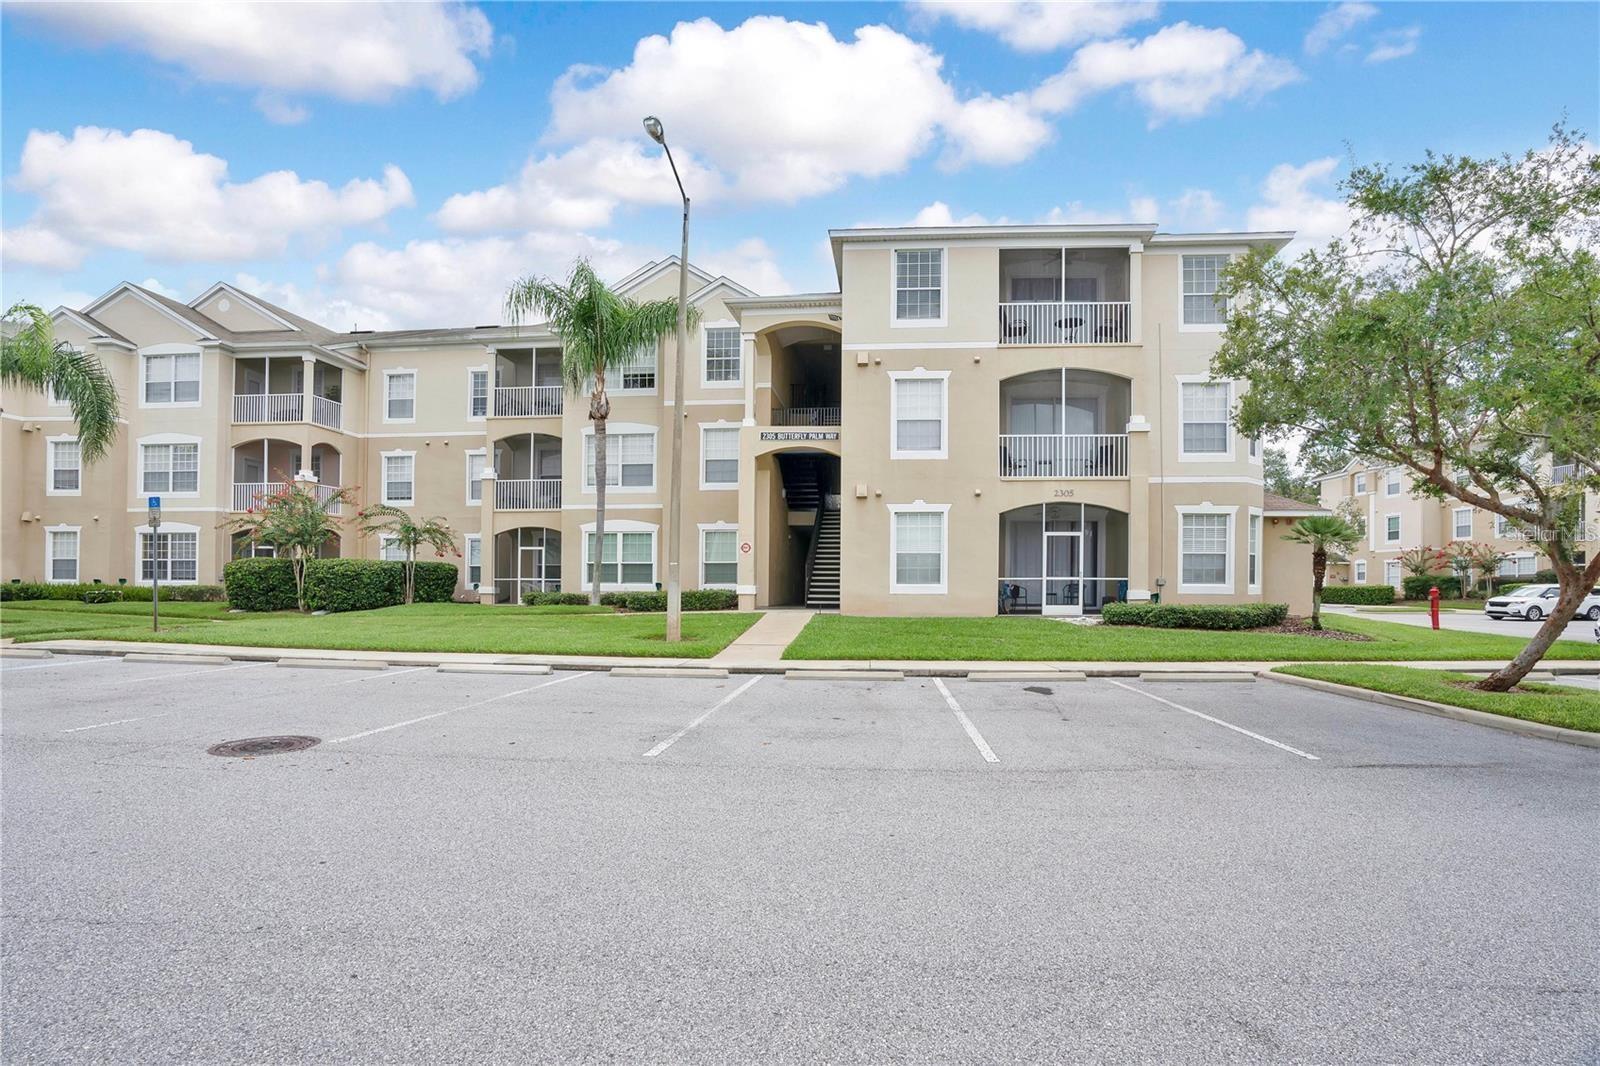 Photo one of 2305 Butterfly Palm Way # 204 Kissimmee FL 34747 | MLS S5100959